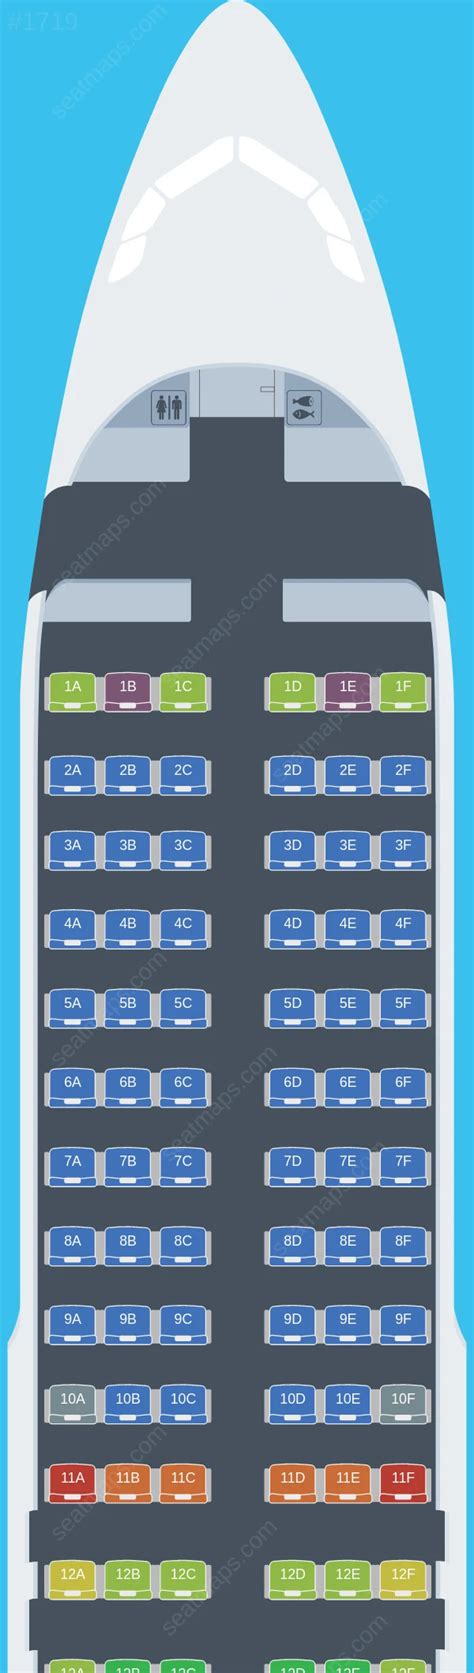 Seat map of Aer Lingus Limited Airbus A320 aircraft